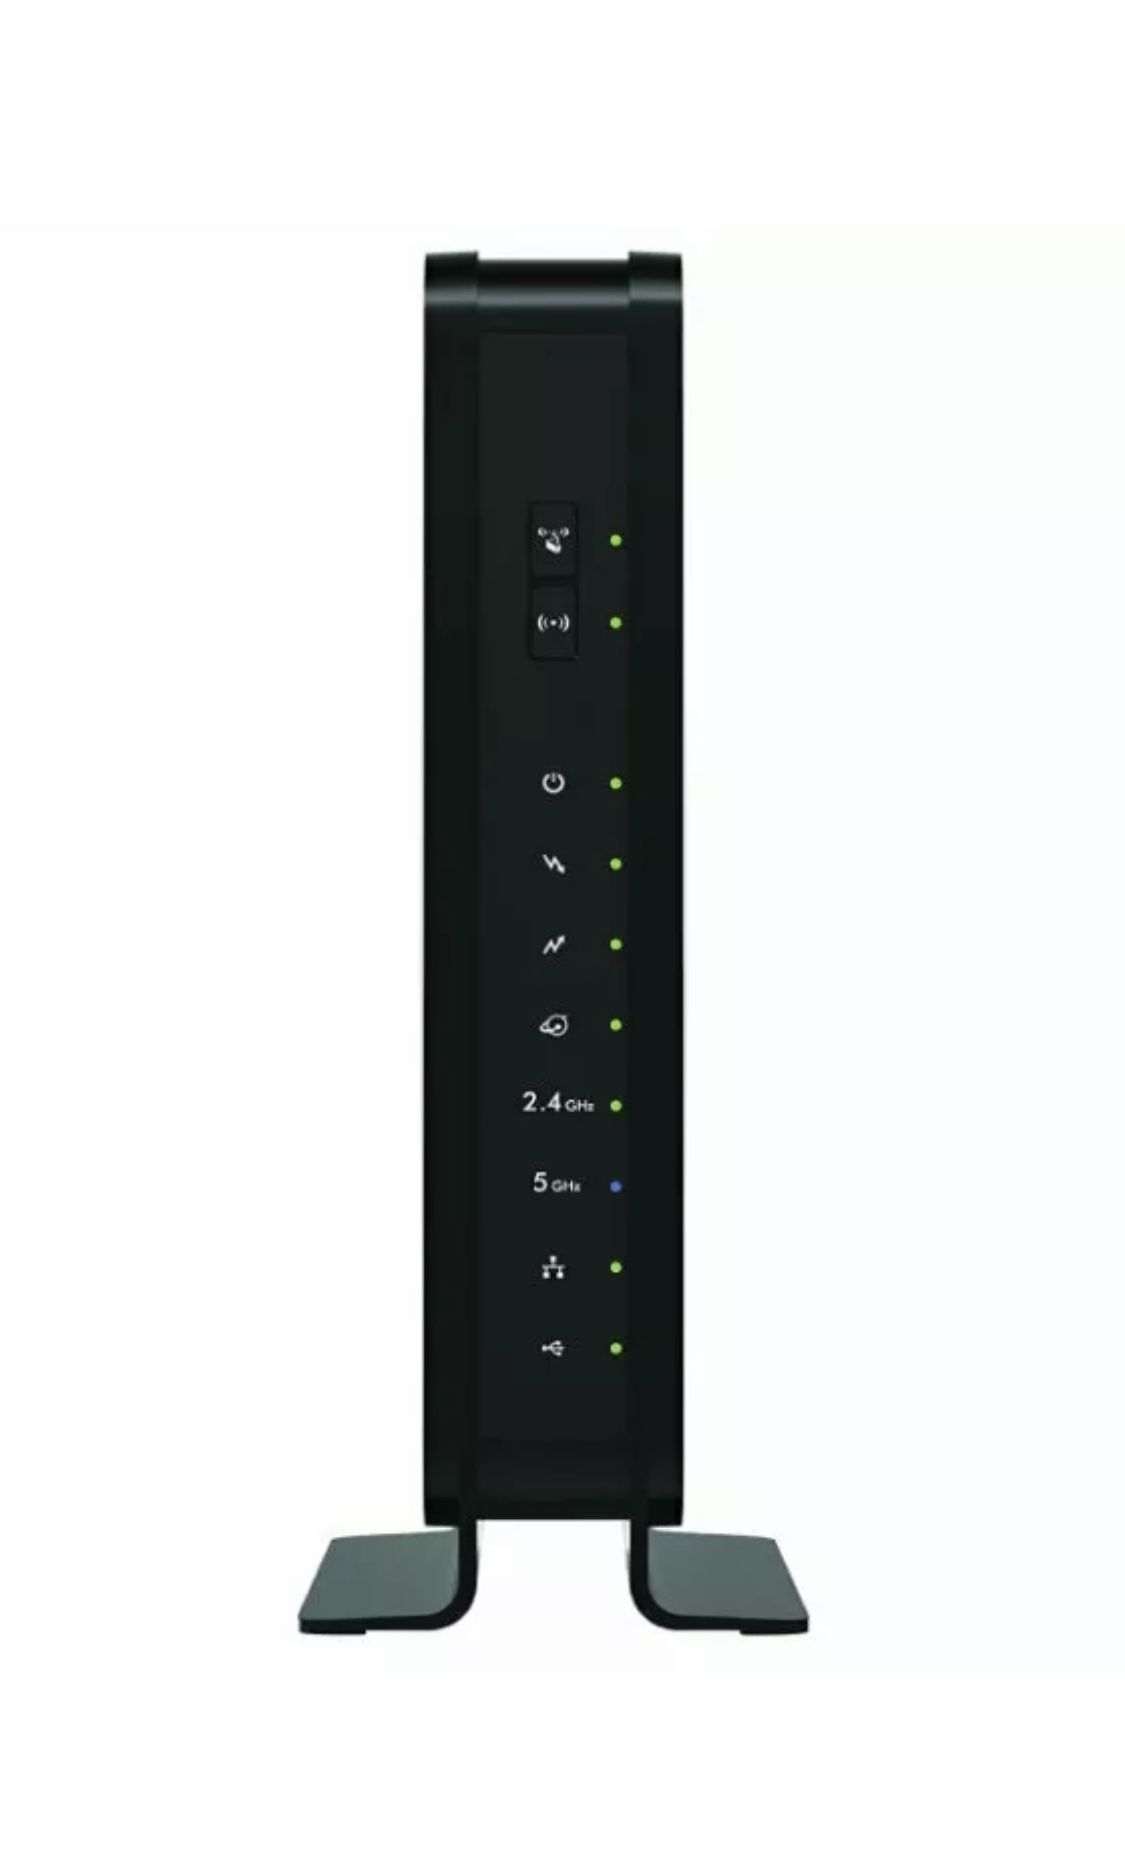 NETGEAR WiFi Cable Modem Router N600 Dual Band (C3700)